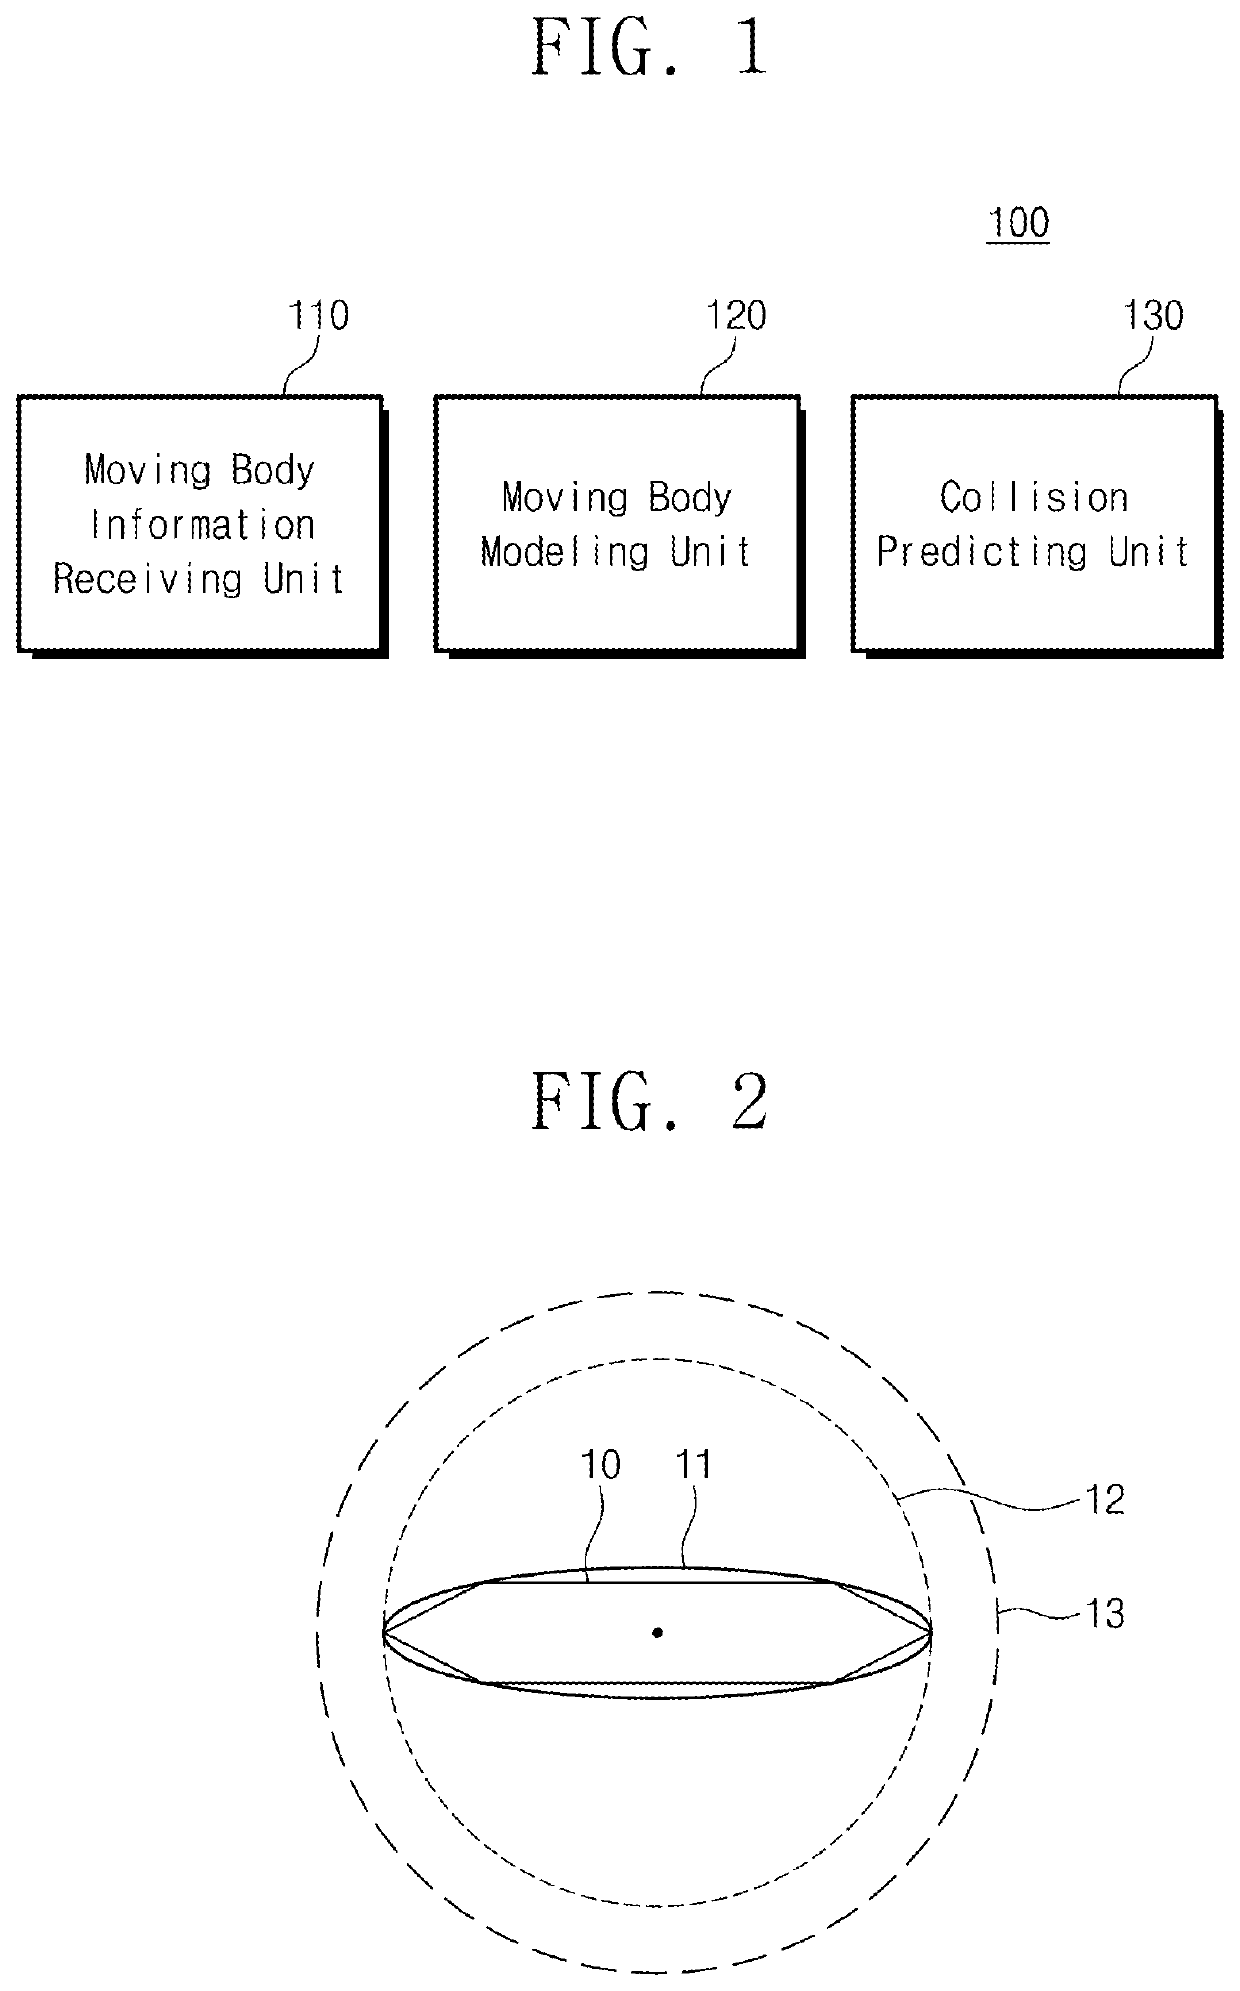 Method for predicting collision and avoiding conflict between multiple moving bodies